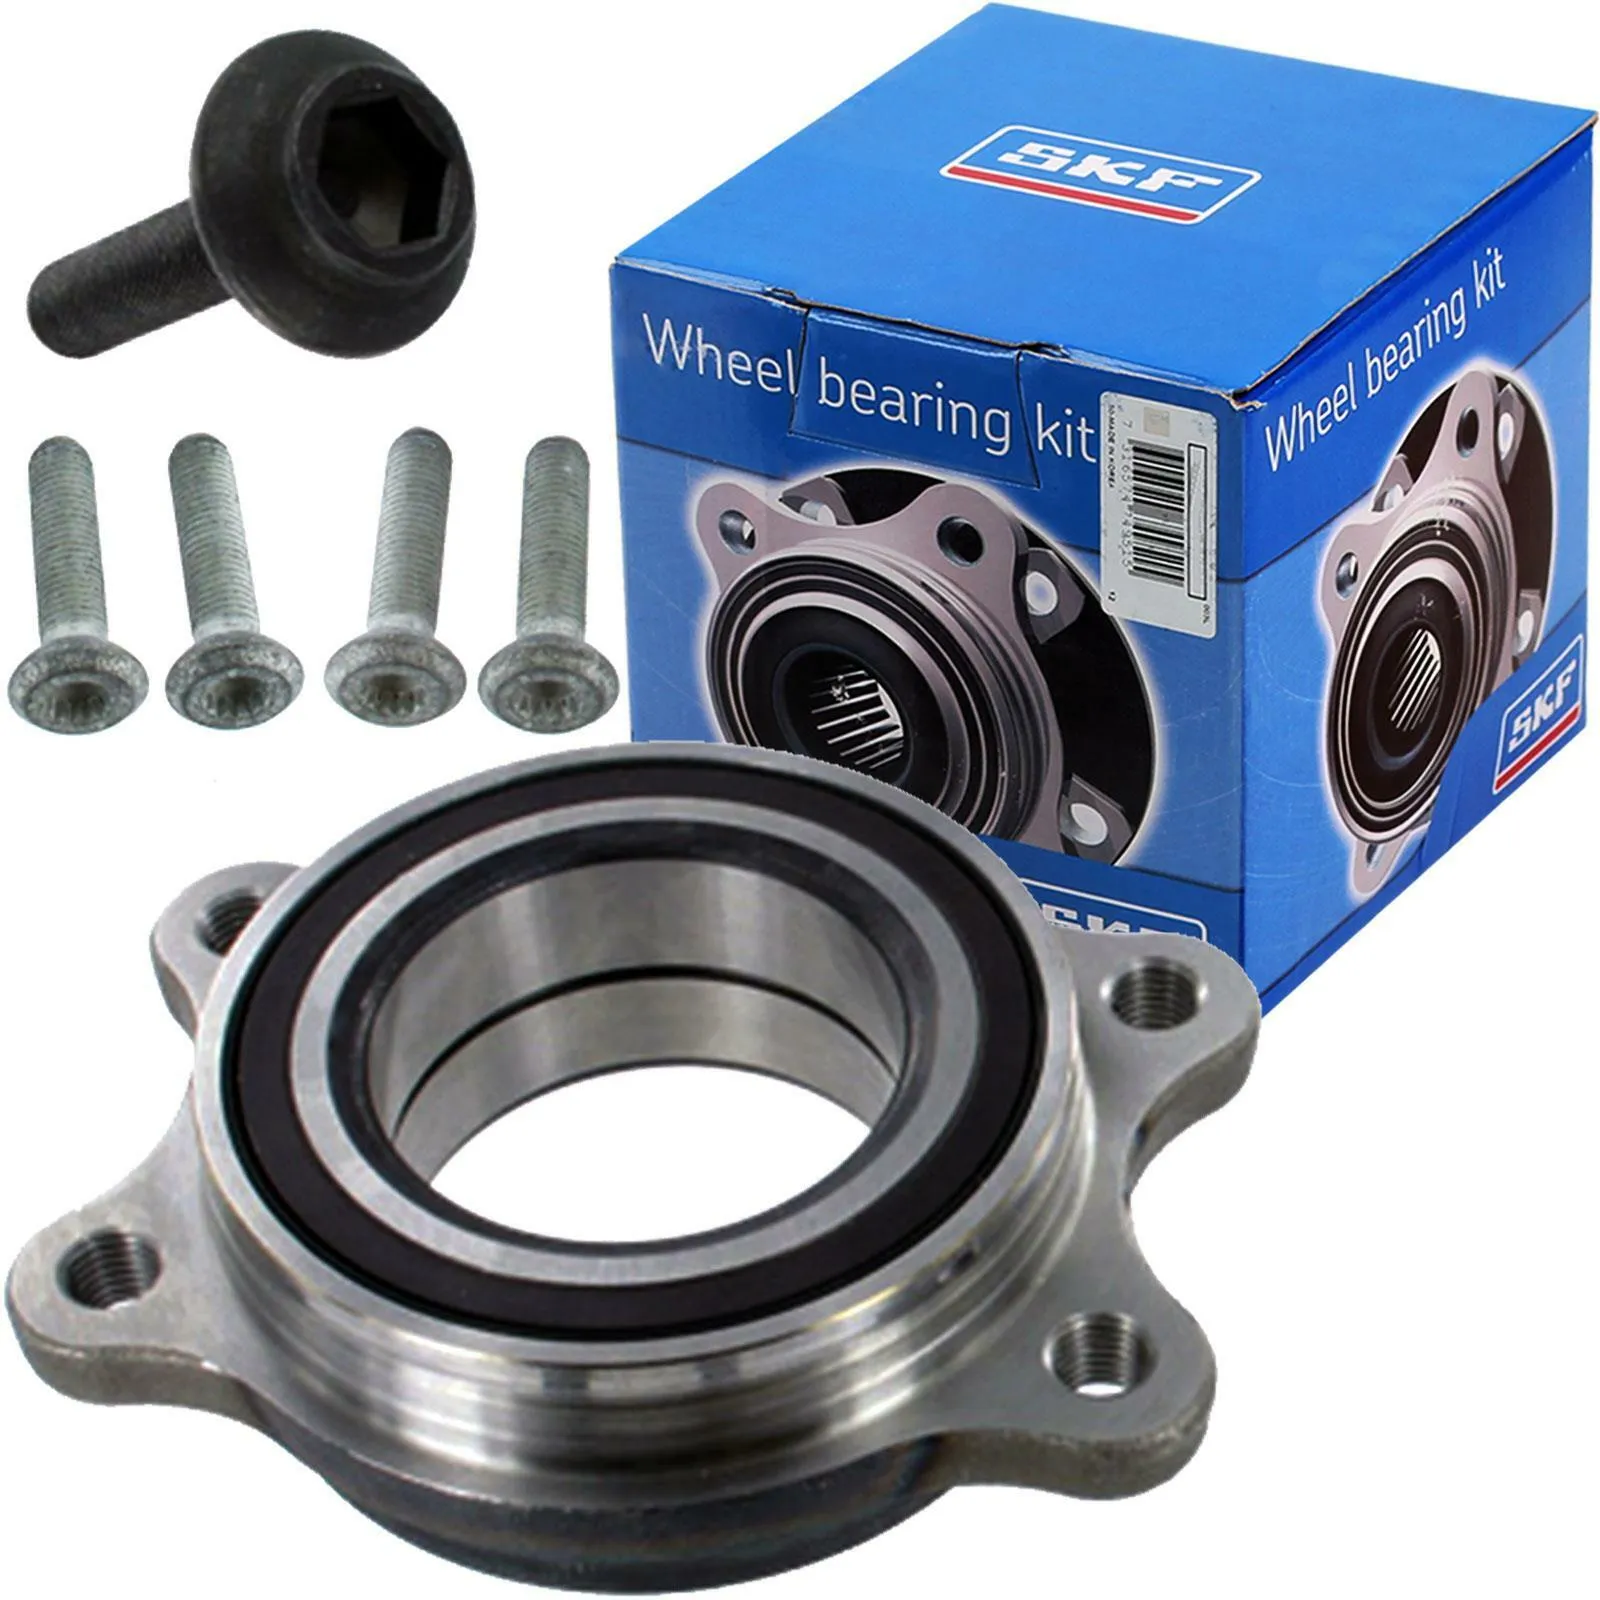 SKF VKBA 6649 Wiellager Audi A4 S4 RS4 A5 S5 RS5 A6 S6 RS6 A7 S7 RS7 A8 S8 Q5